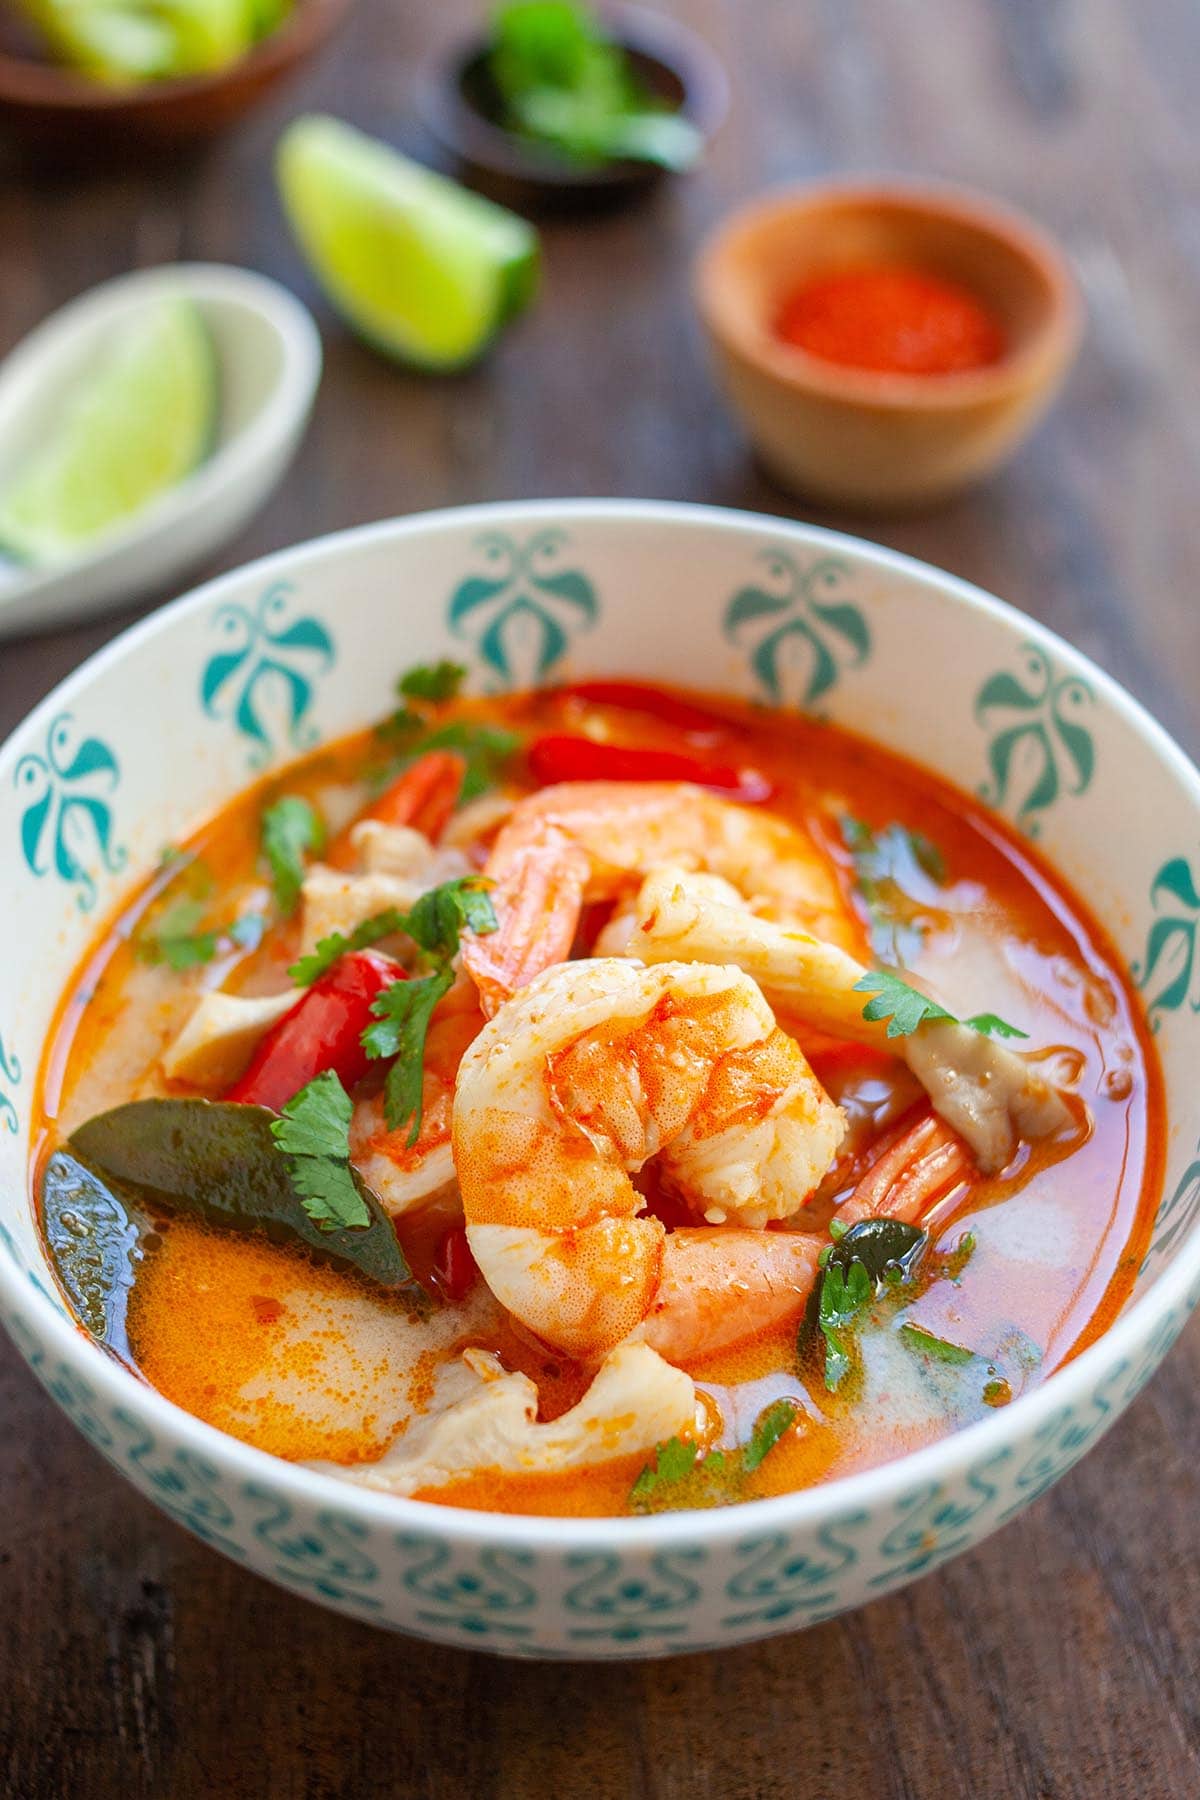 Top down view of delicious Tom Yum Soup with shrimp and mushroom, a delicious Thai recipe, laid in a bowl.